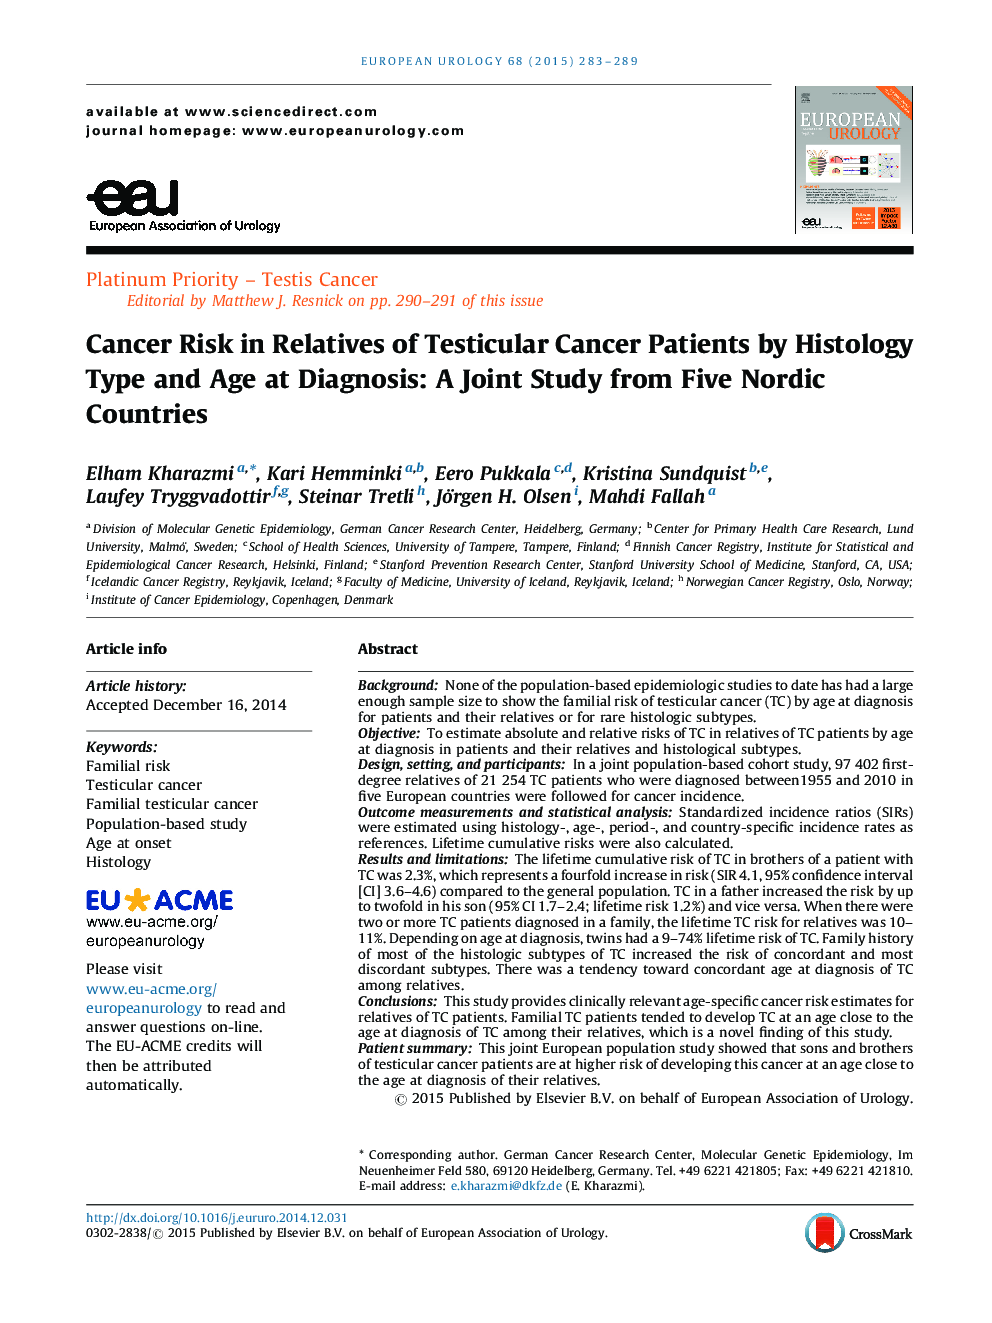 Cancer Risk in Relatives of Testicular Cancer Patients by Histology Type and Age at Diagnosis: A Joint Study from Five Nordic Countries